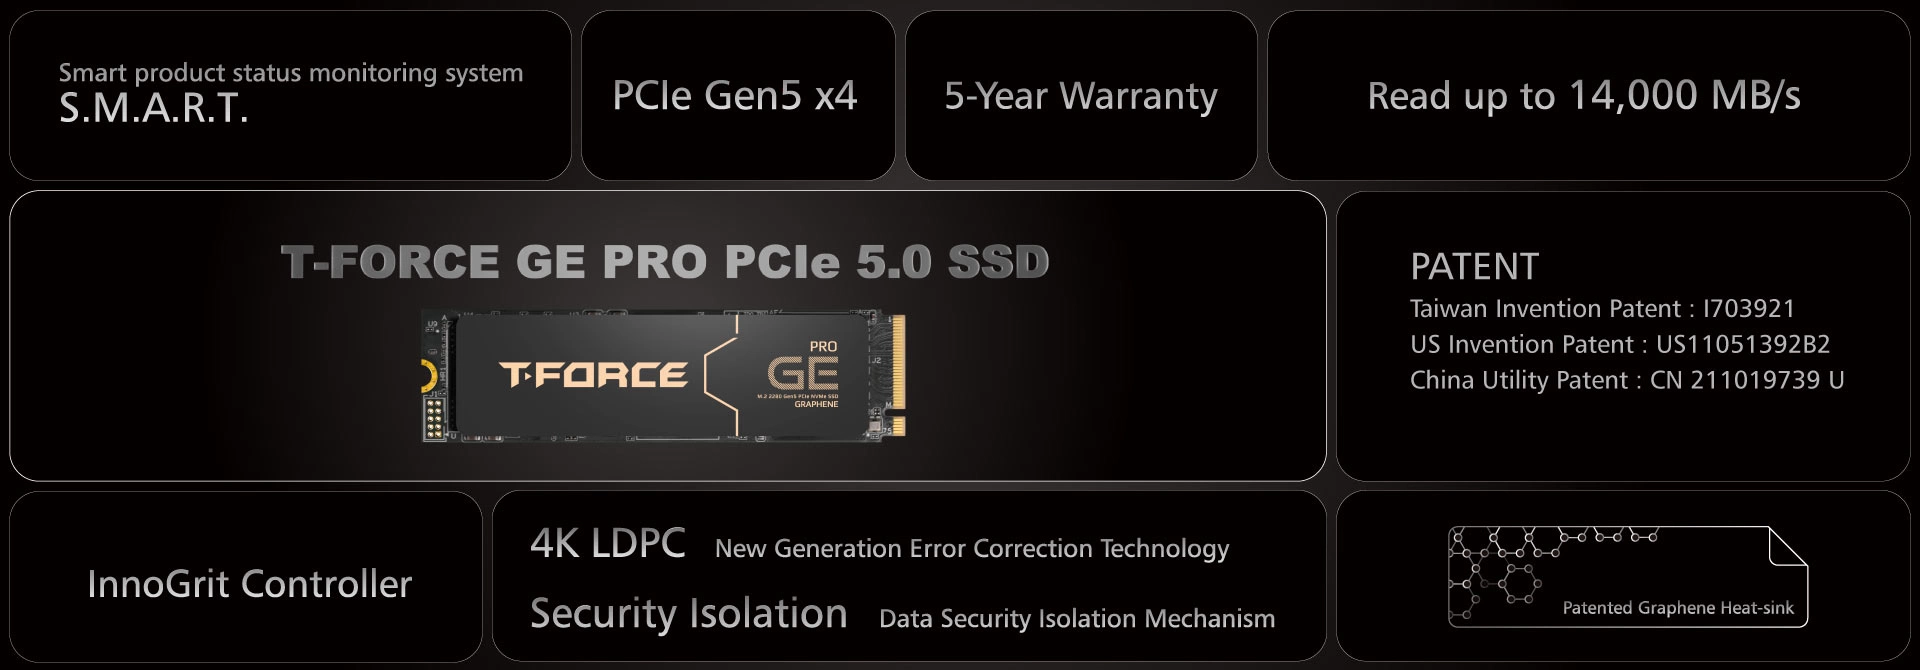 Team Group Ssd T Force Ge Pro Pcie 5 Presentation